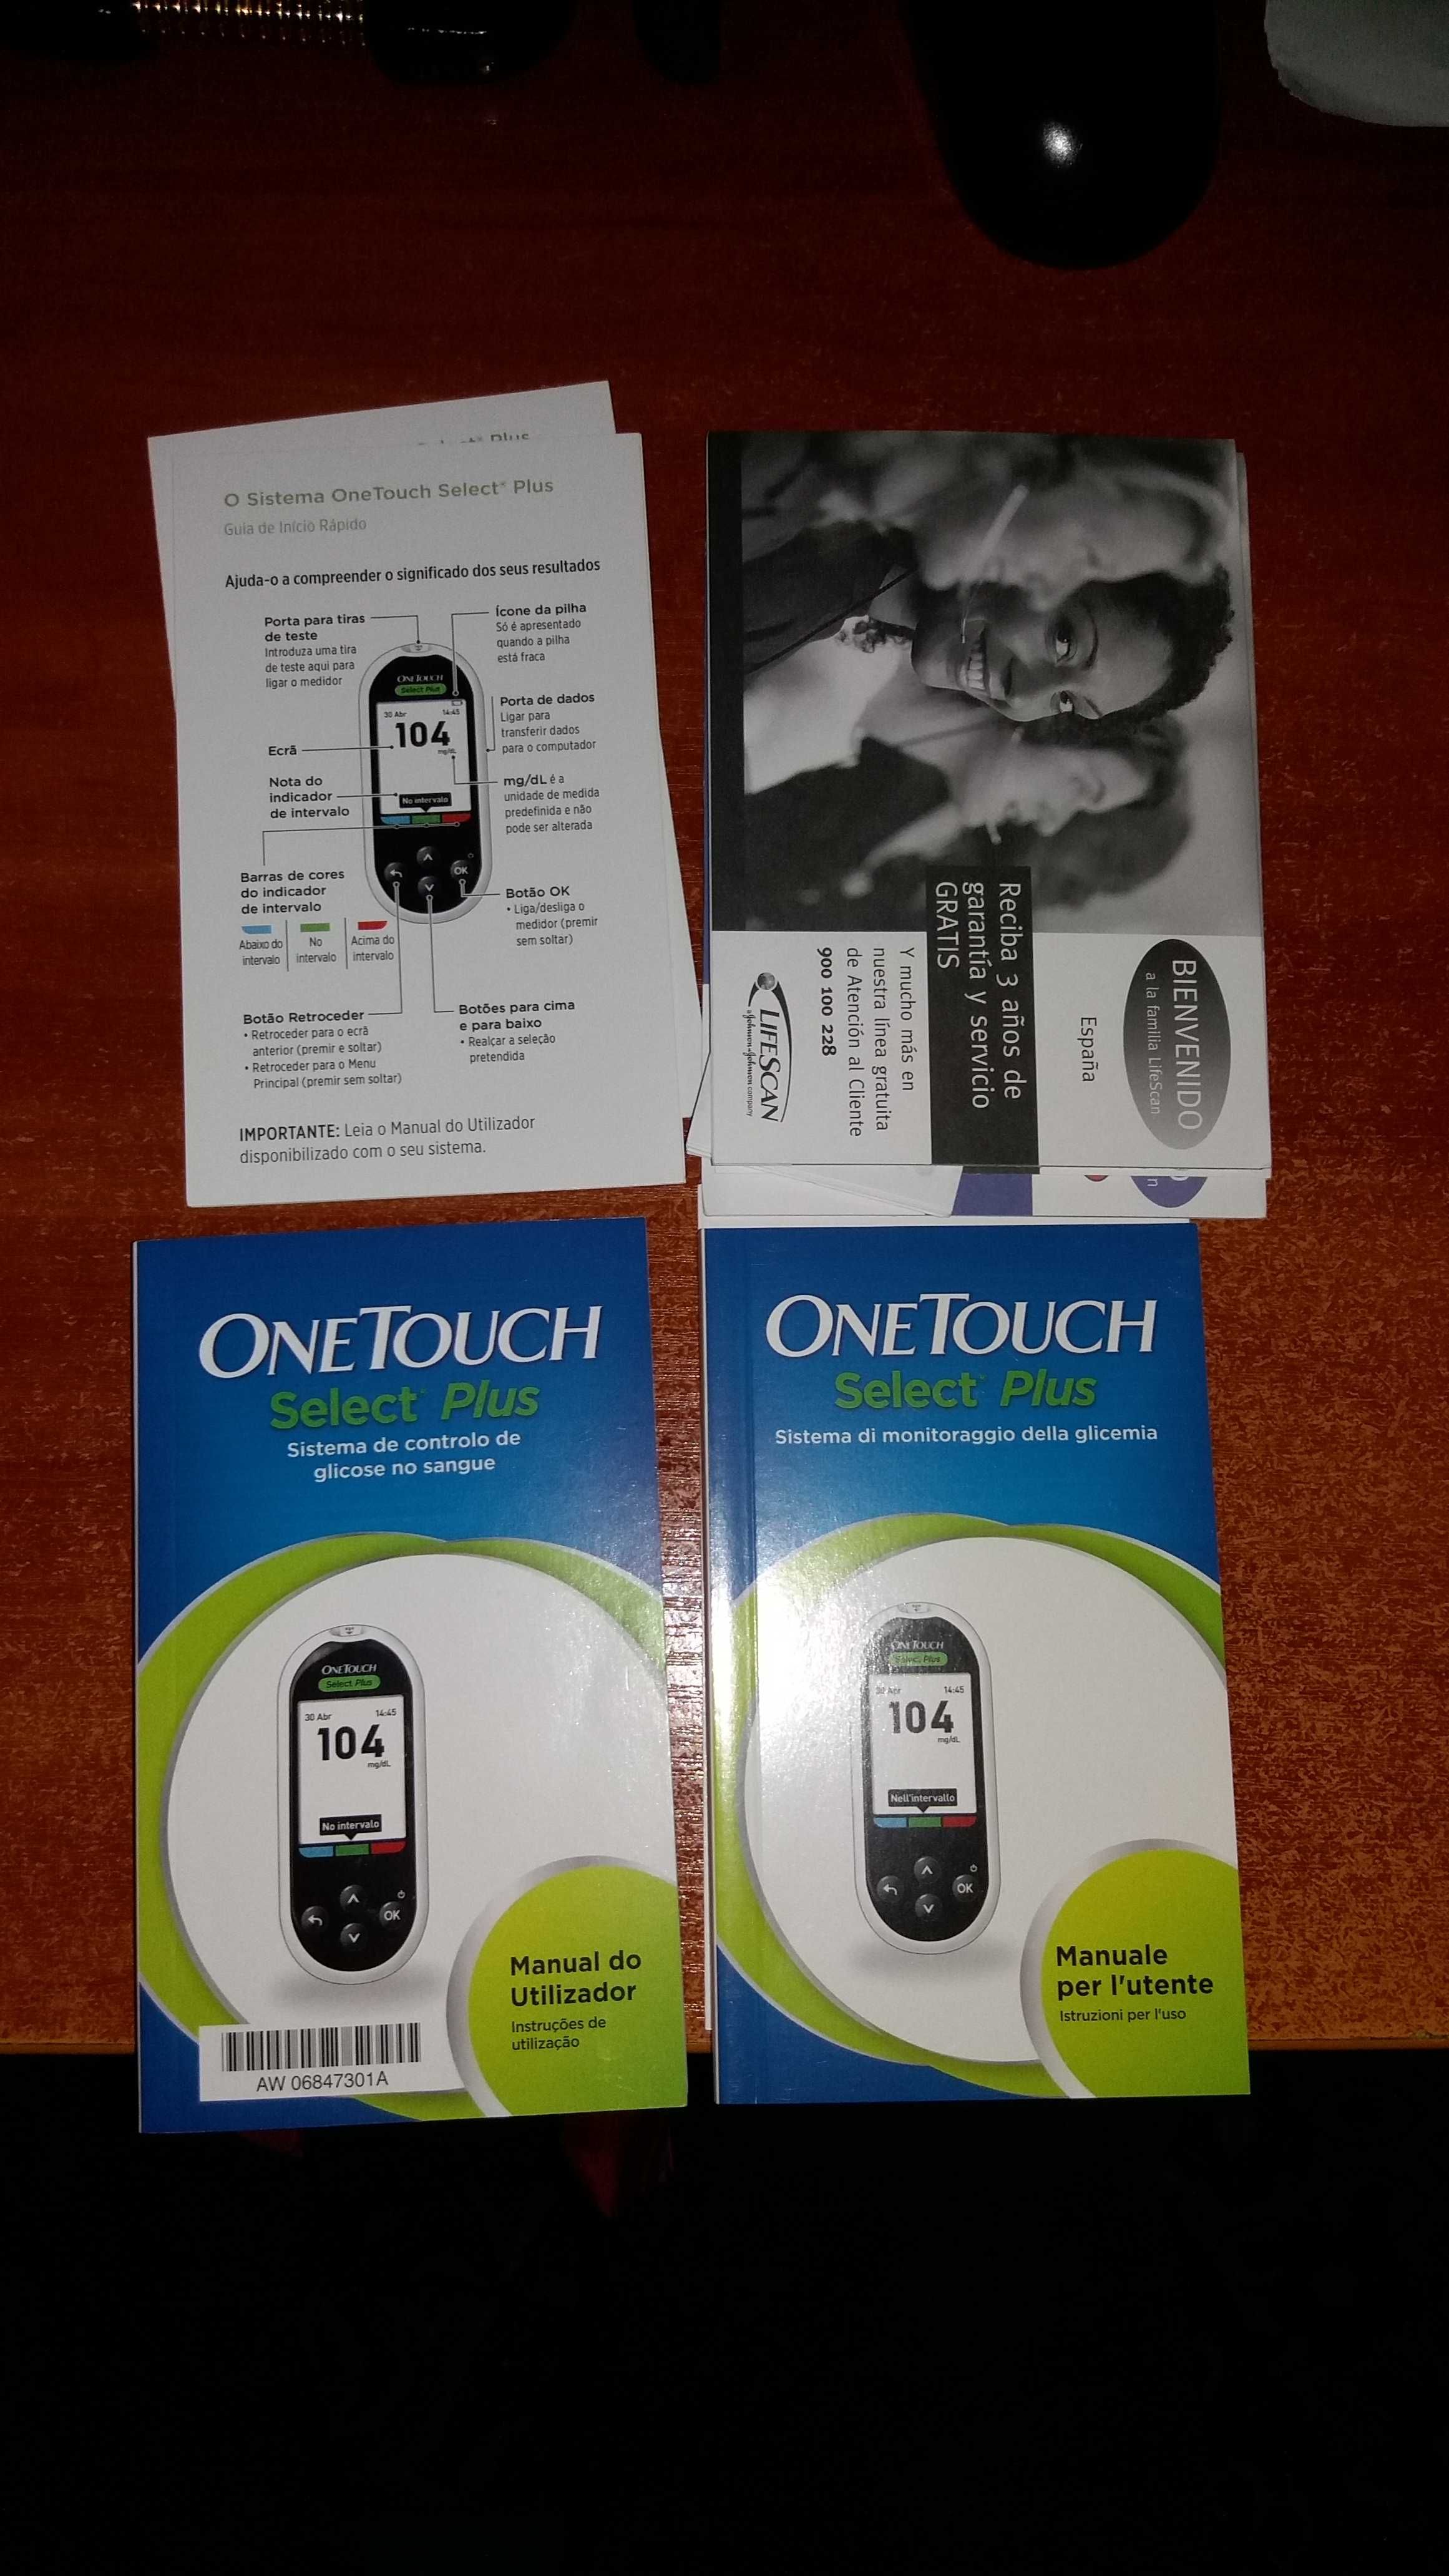 One Touch Select Plus),